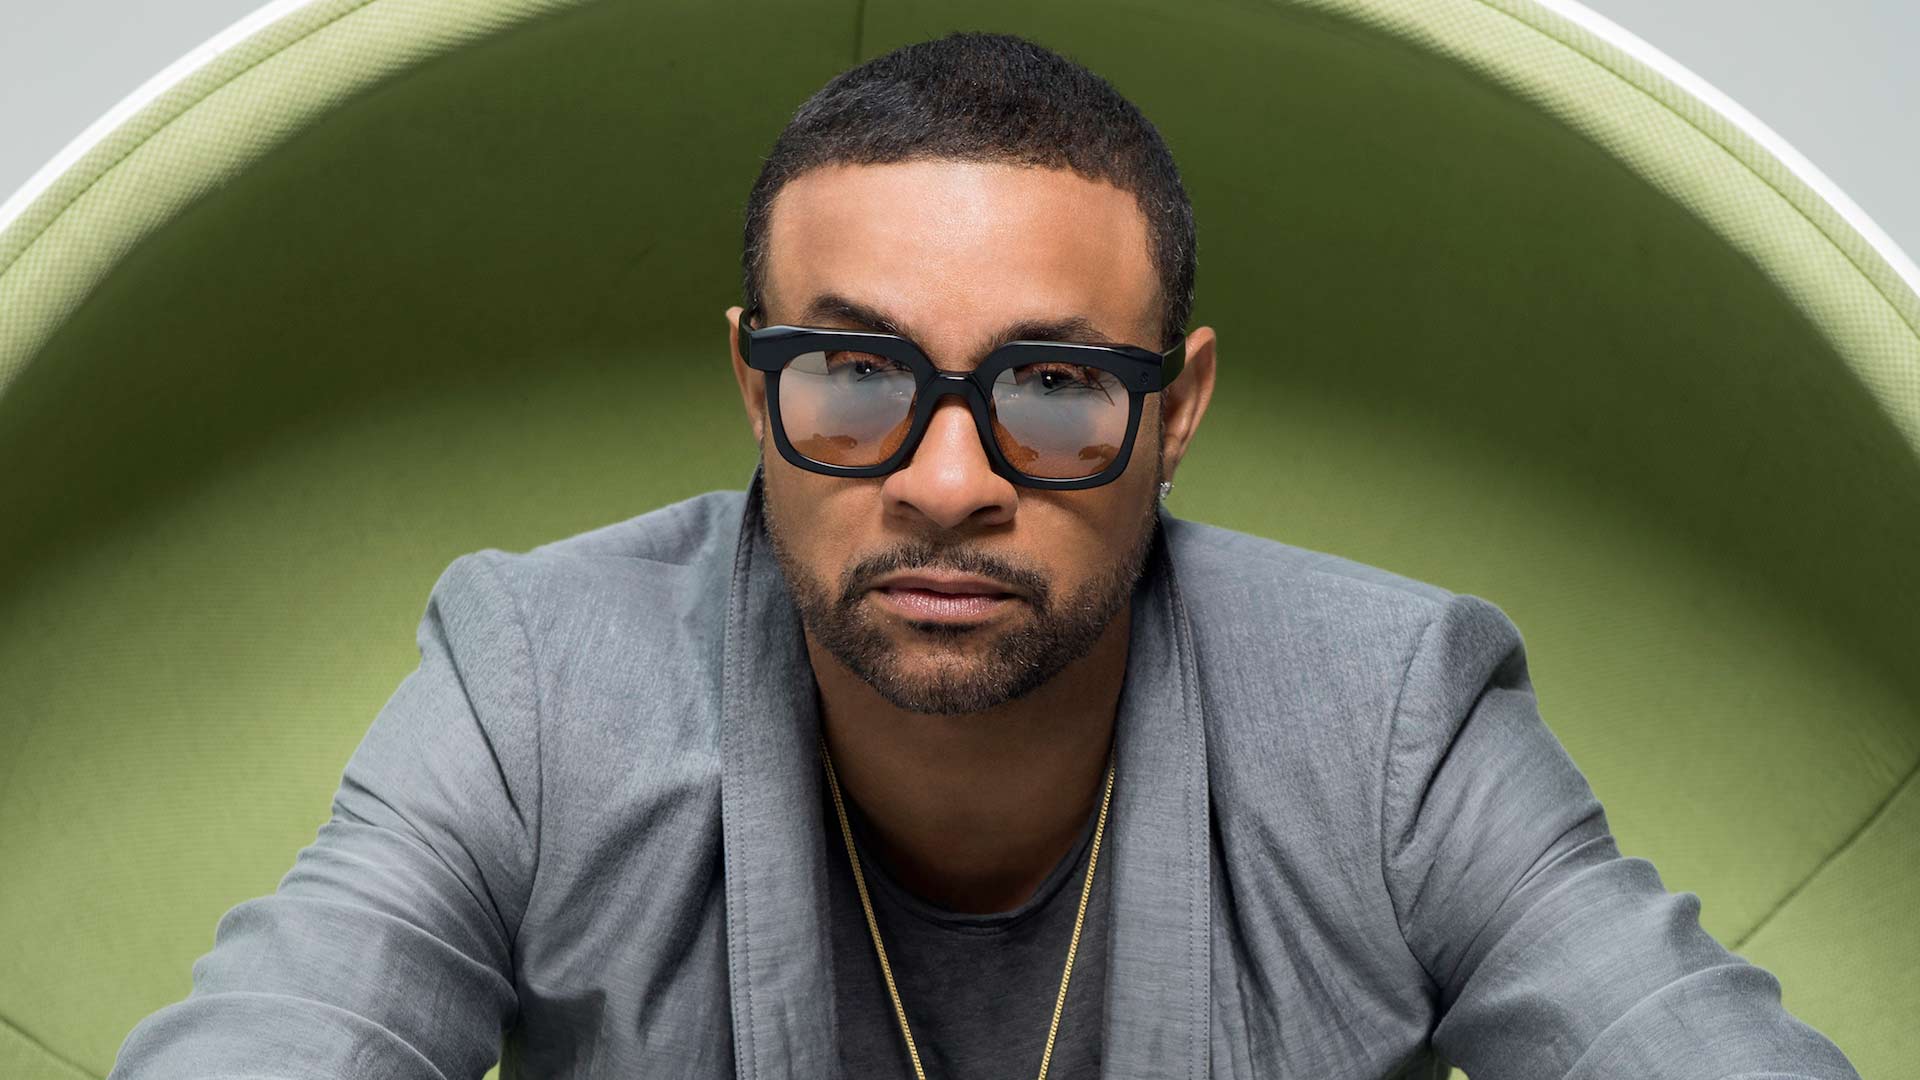 Southeast Queensland Is Getting a New Waterside Reggae Festival Headlined by Shaggy and Sean Paul